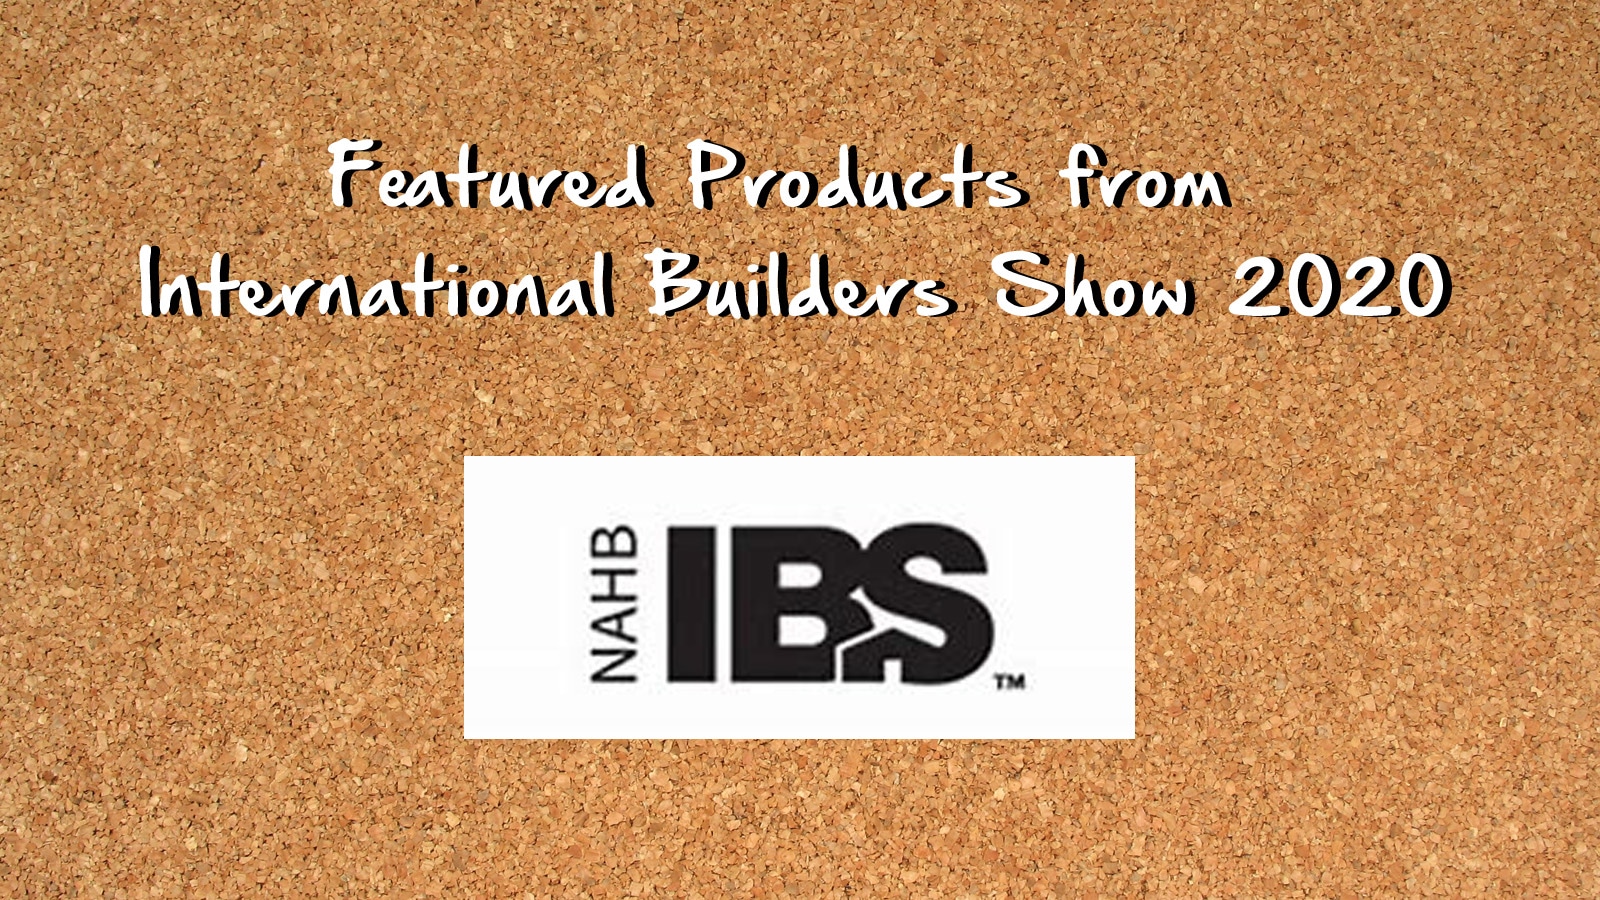 Featured Products from IBS 2020!